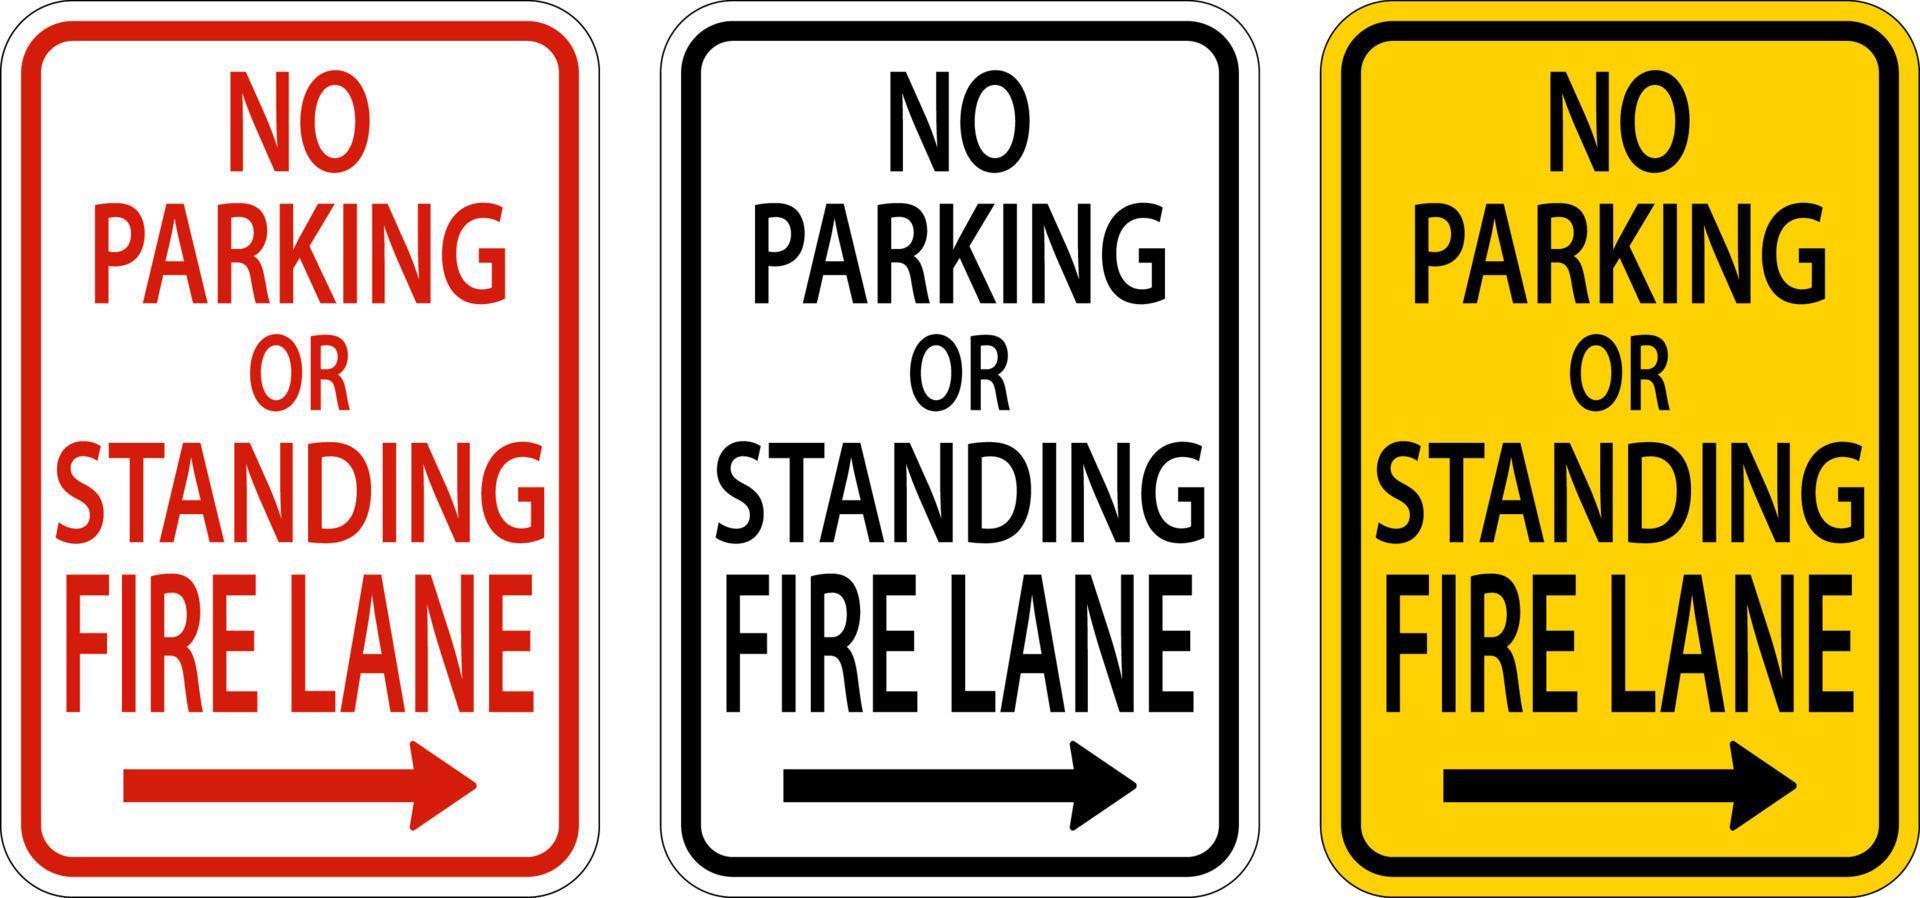 No Parking Fire Lane Right Arrow Sign On White Background vector